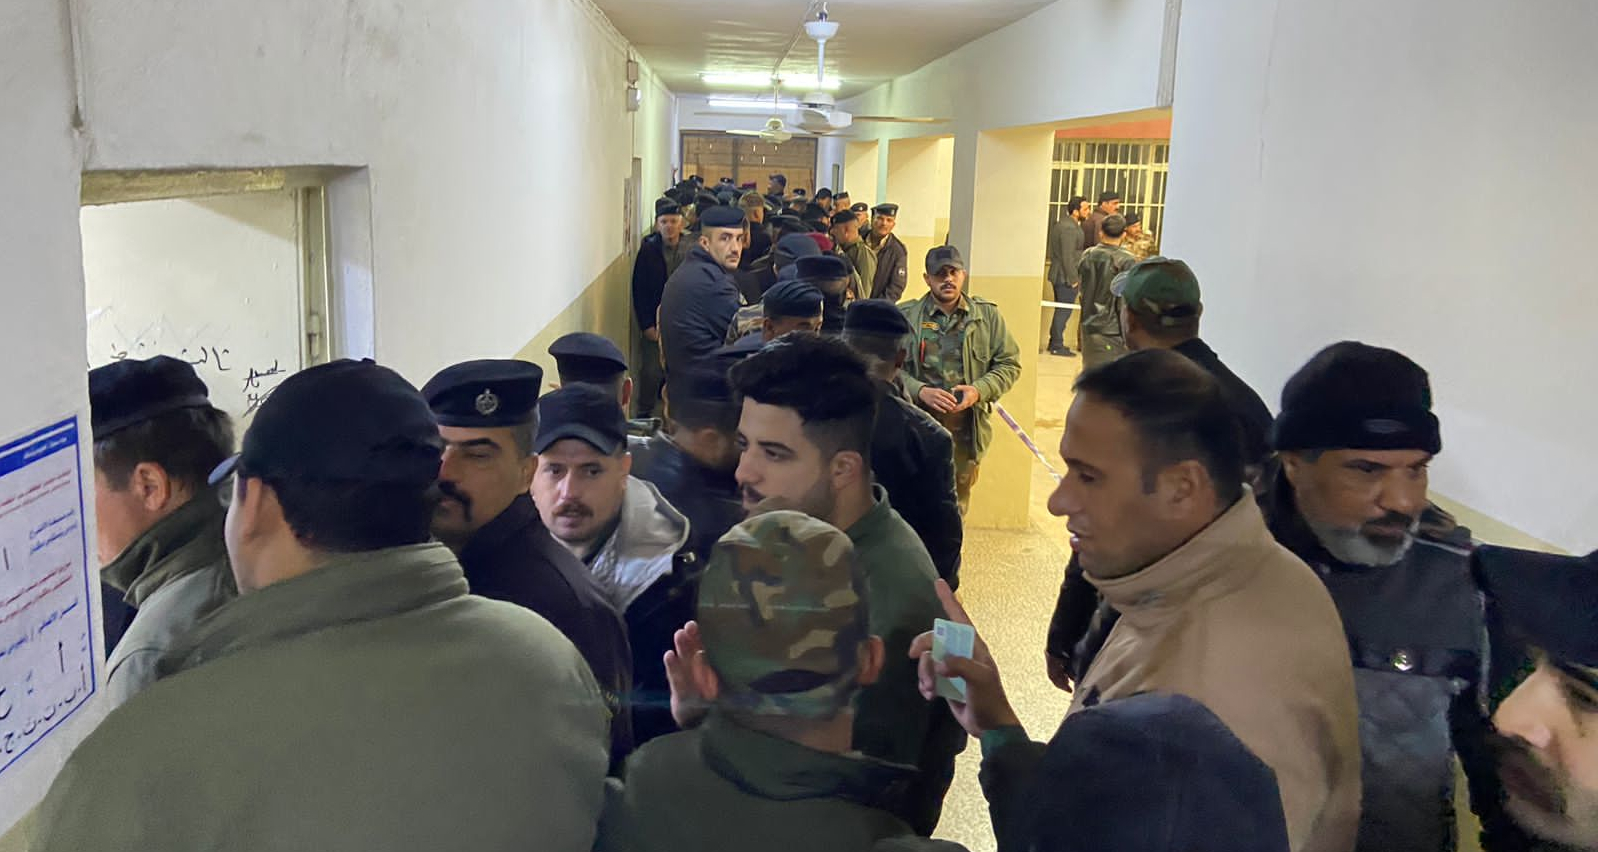 Local officers report high voter turnout in Nineveh and Saladins special election